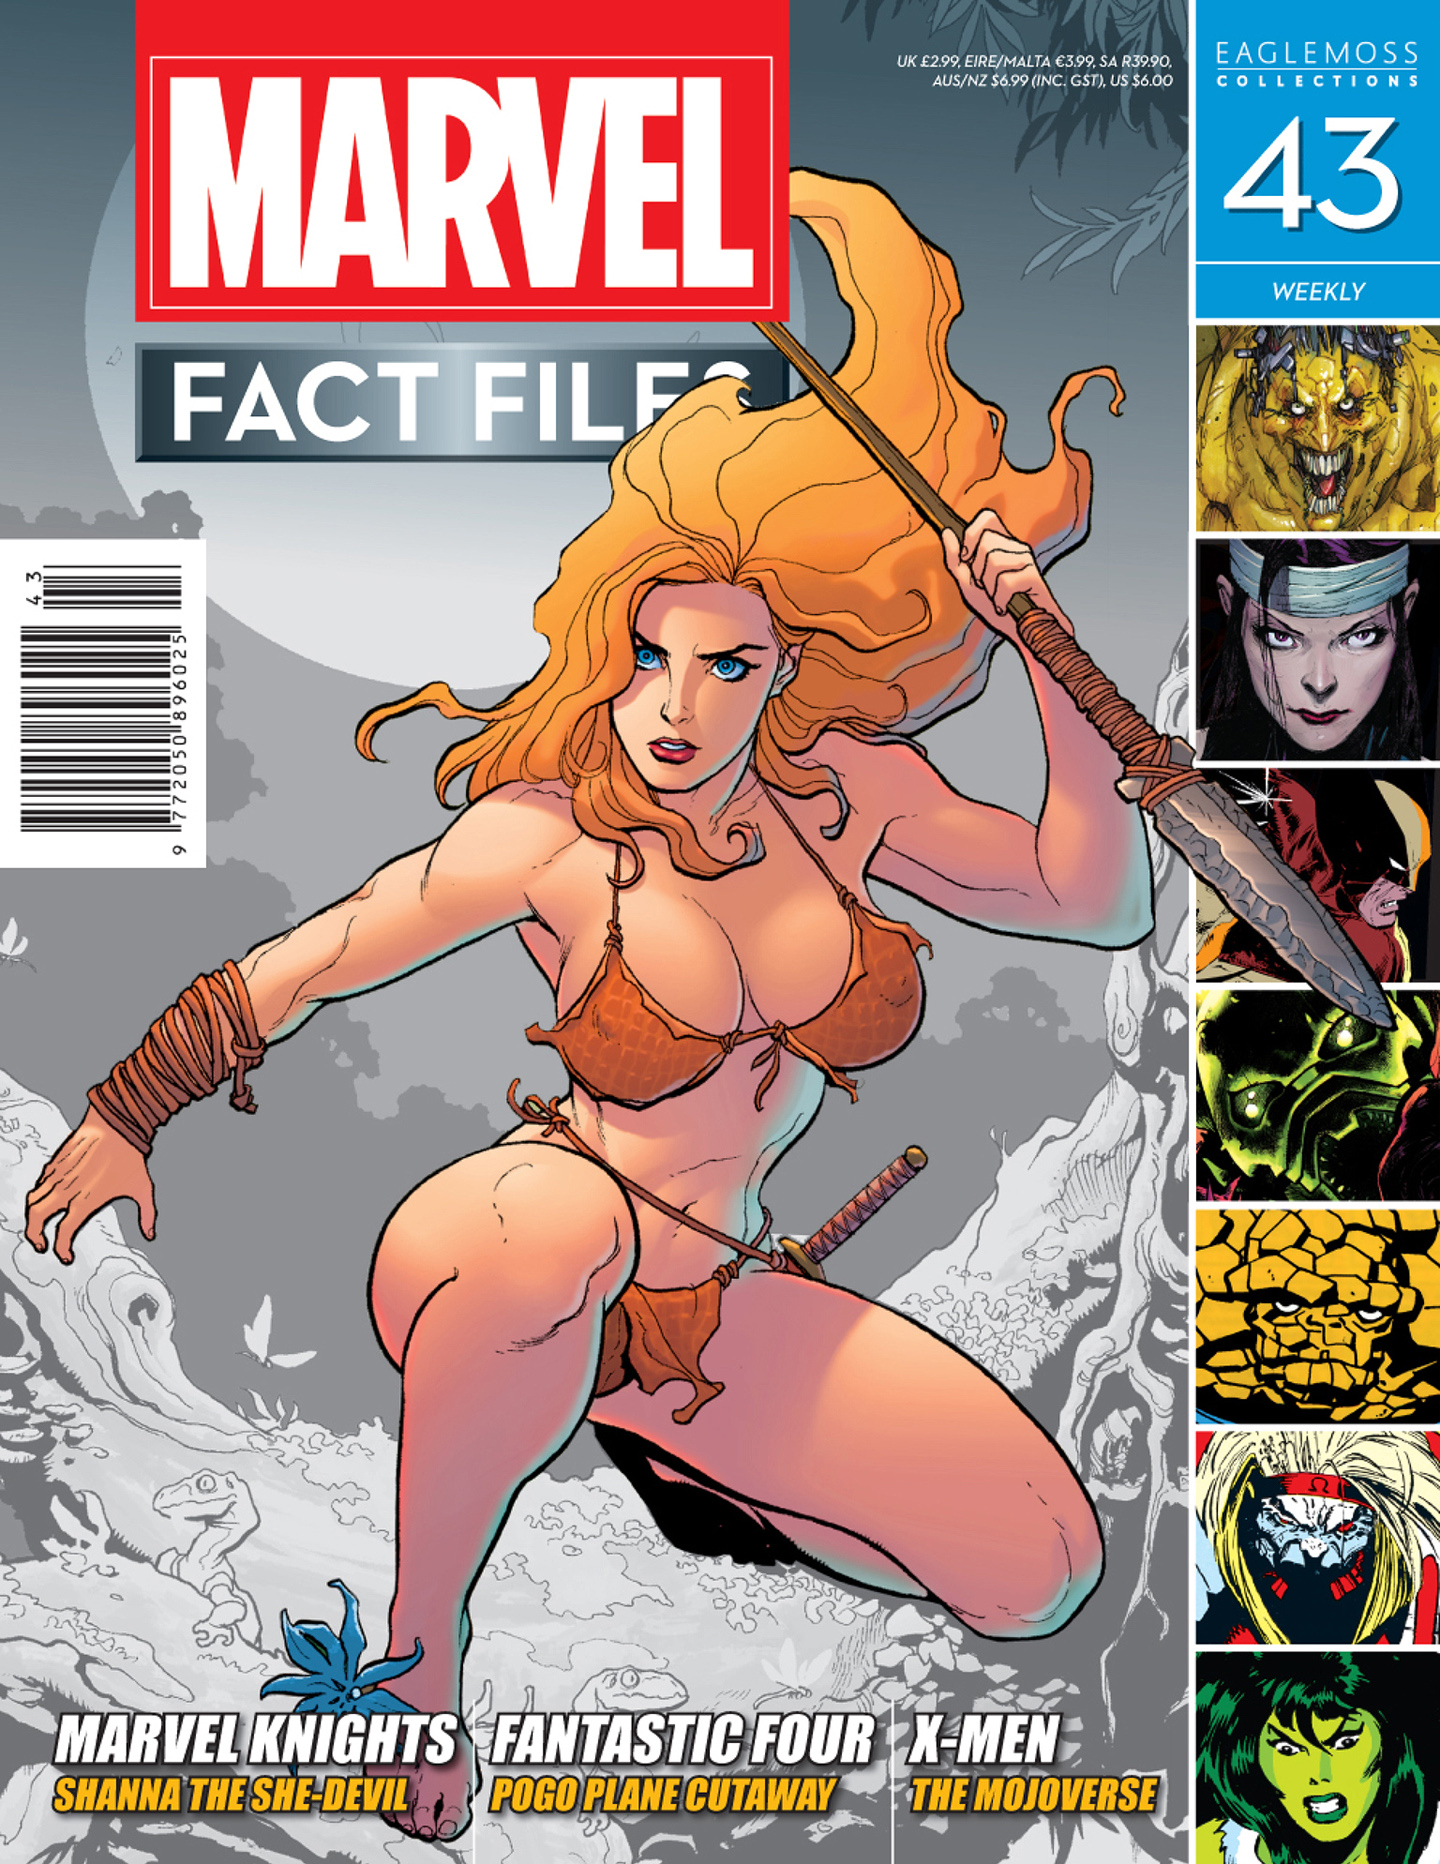 Read online Marvel Fact Files comic -  Issue #43 - 2